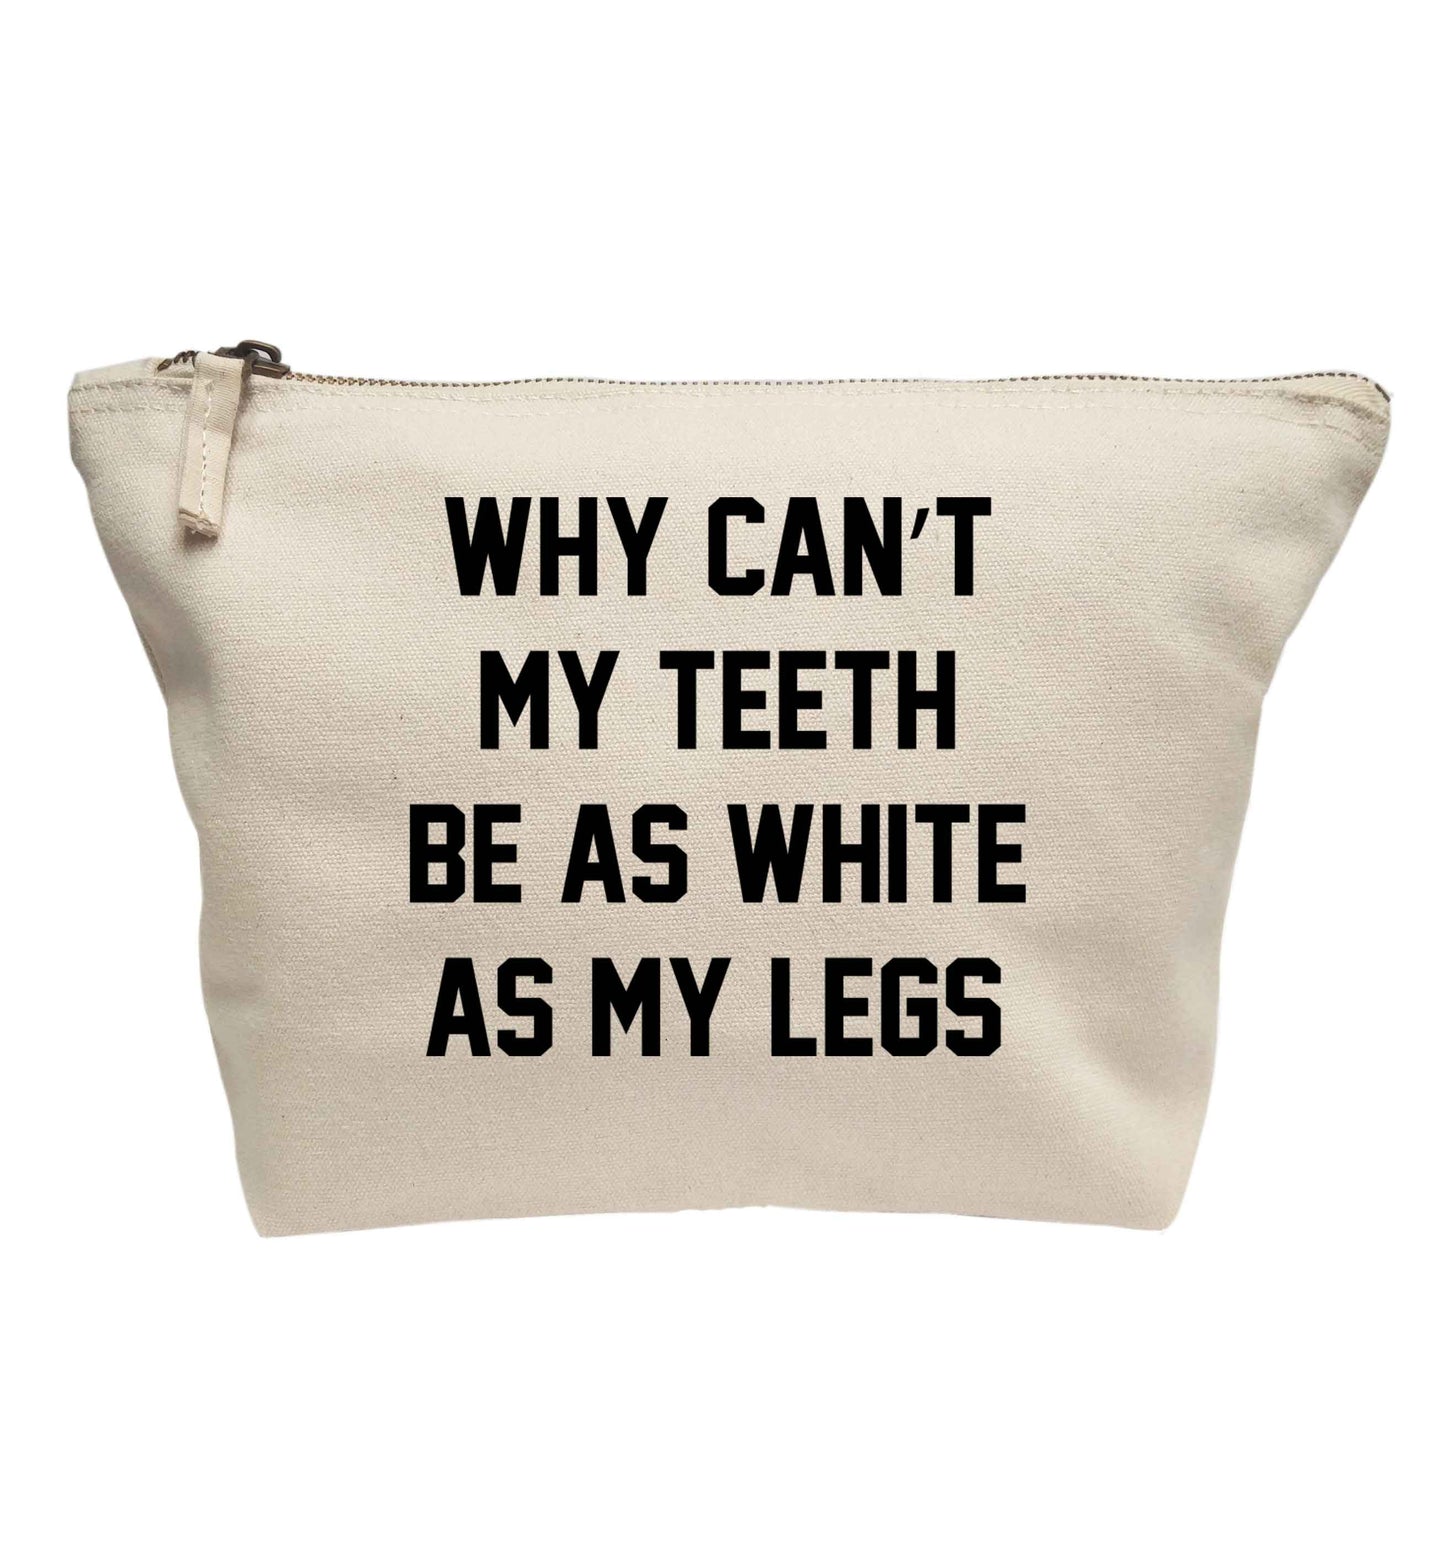 Why can't my teeth be as white as my legs | makeup / wash bag